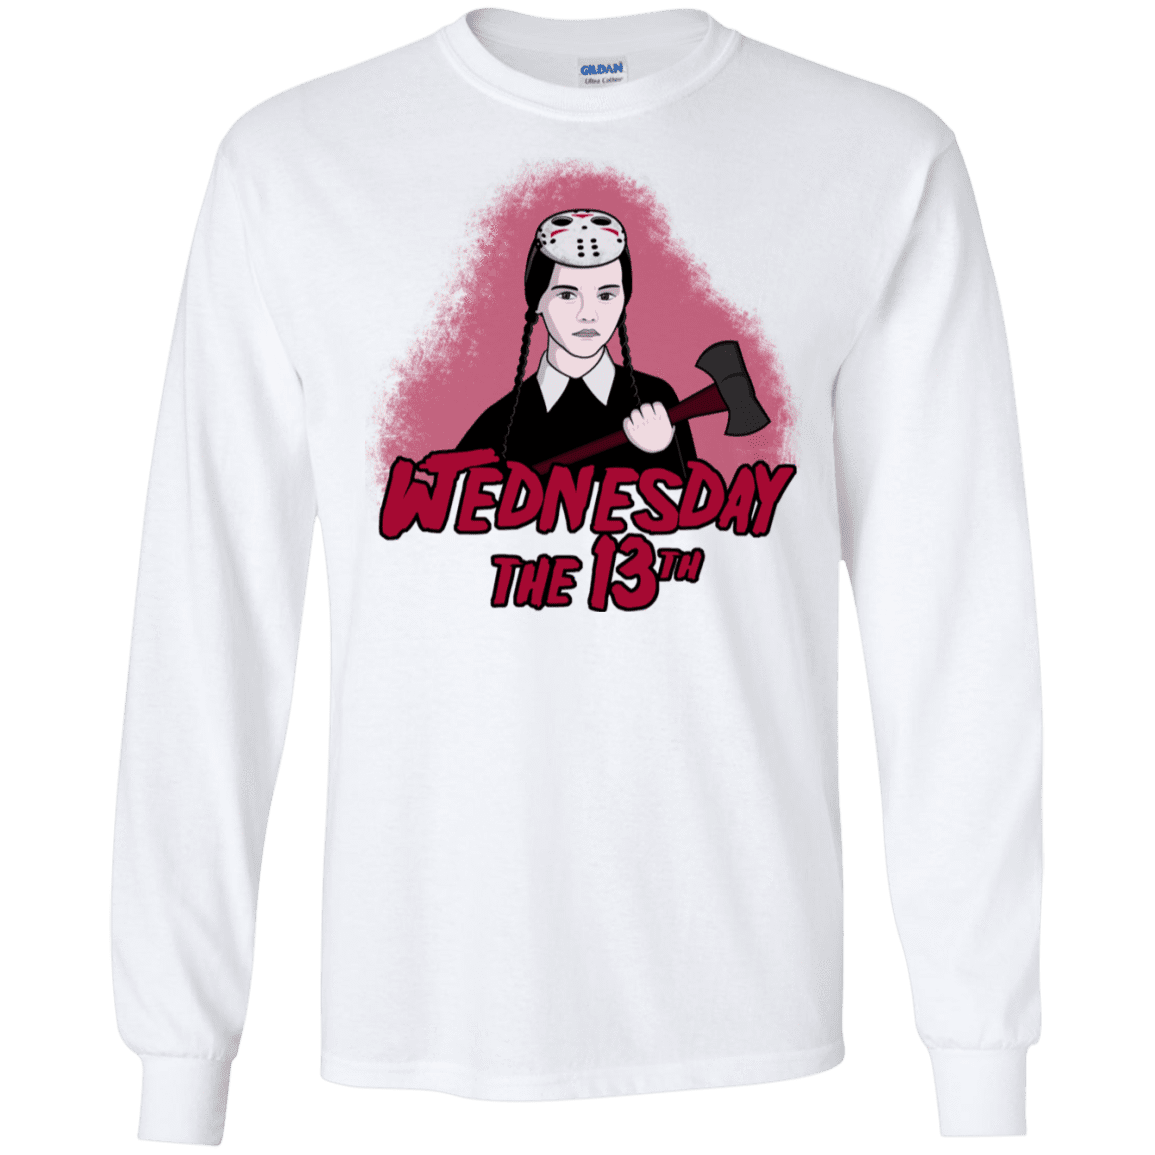 T-Shirts White / S Wednesday The 13th Men's Long Sleeve T-Shirt